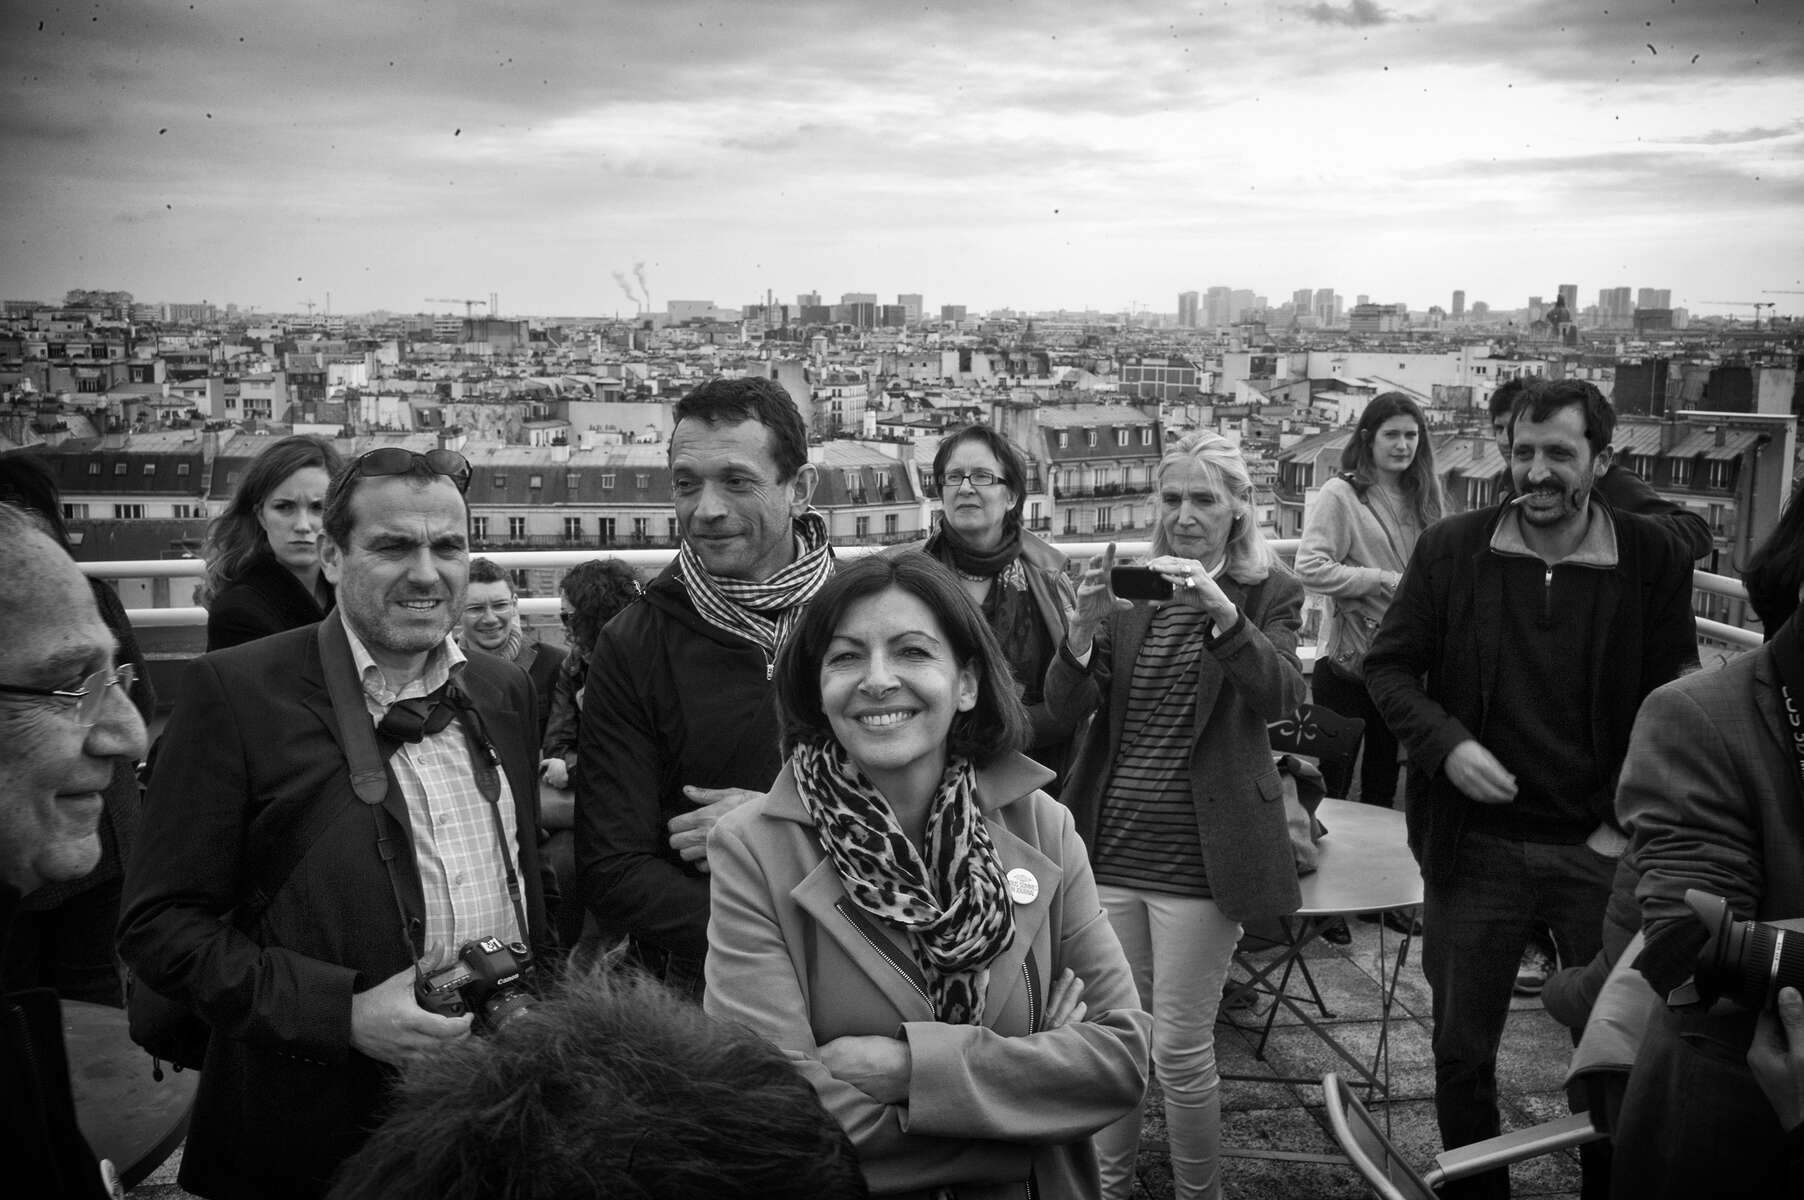 March 15, 2014.  PARIS, FRANCE-  Mayoral candidate Anne Hidalgo attends a {quote}Save Libération{quote} event at the left-wing newspaper's headquarters to lend support to their efforts not be shuttered by their shareholders.   For the first time in France's history, Paris will have a woman as a mayor - either Socialist Anne Hidalgo or Center-Right Nathalie Kosciusko-Morizet.  Photo by Scout Tufankjian